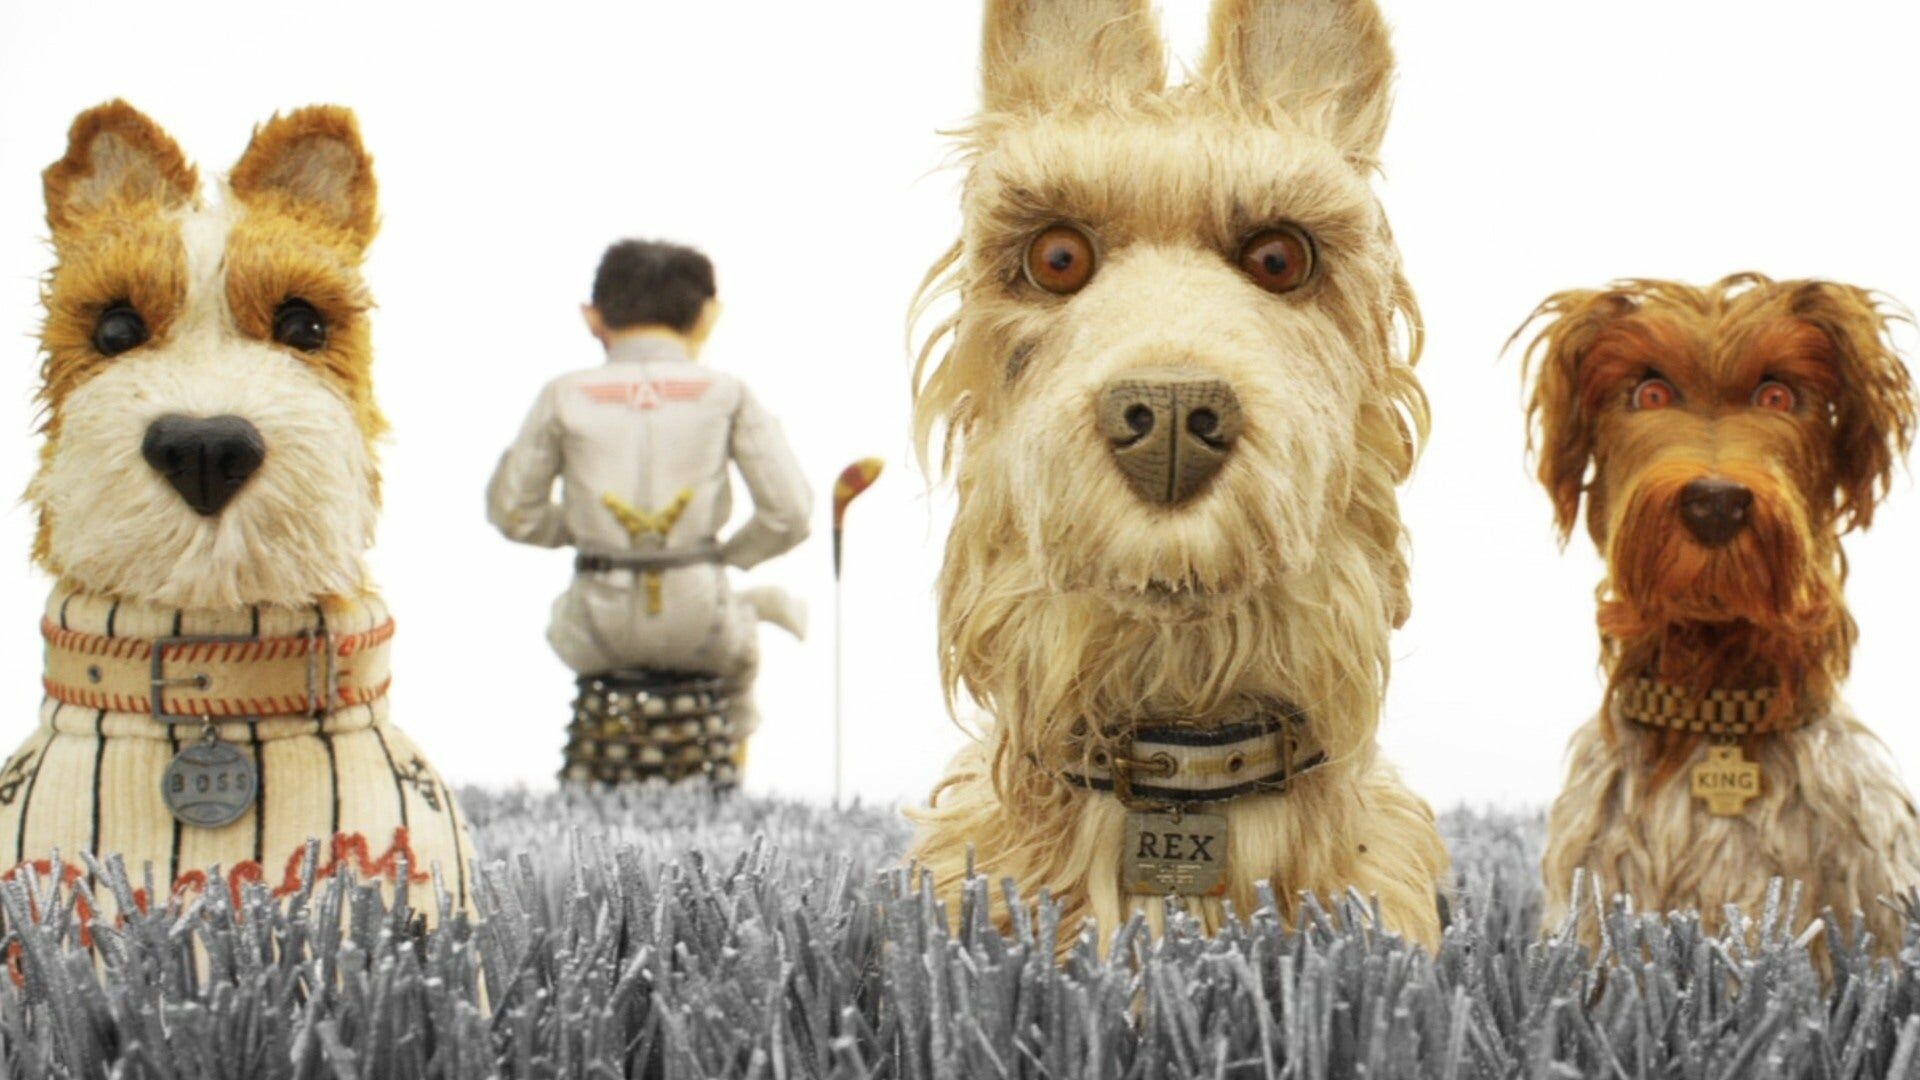 Isle of Dogs: Wes Anderson's new film, A comedic drama realized with stop-motion animation. 1920x1080 Full HD Background.